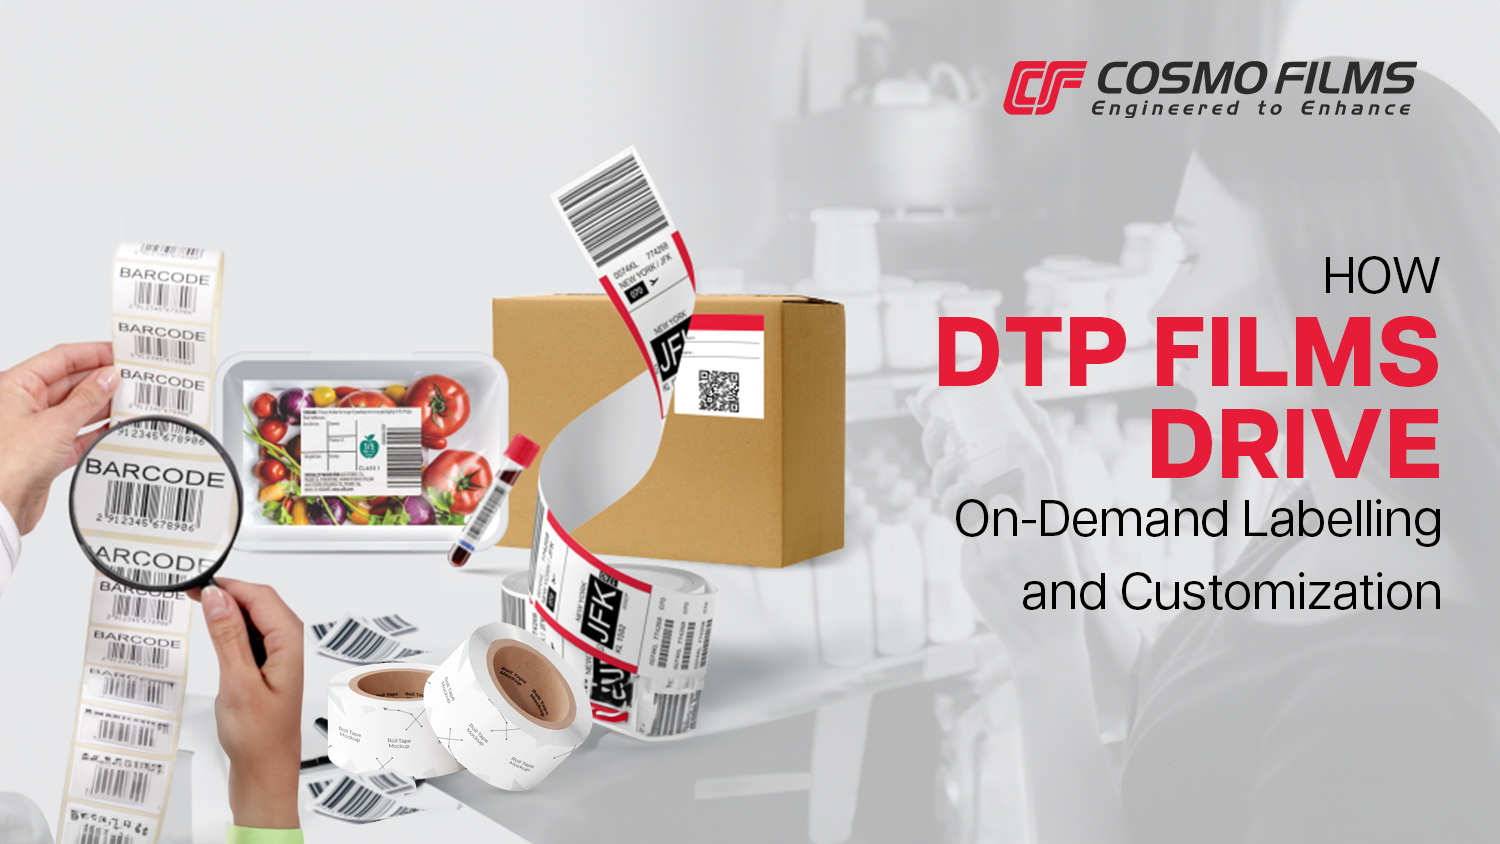 The Role of DTP Films in On-Demand Labelling and Customization